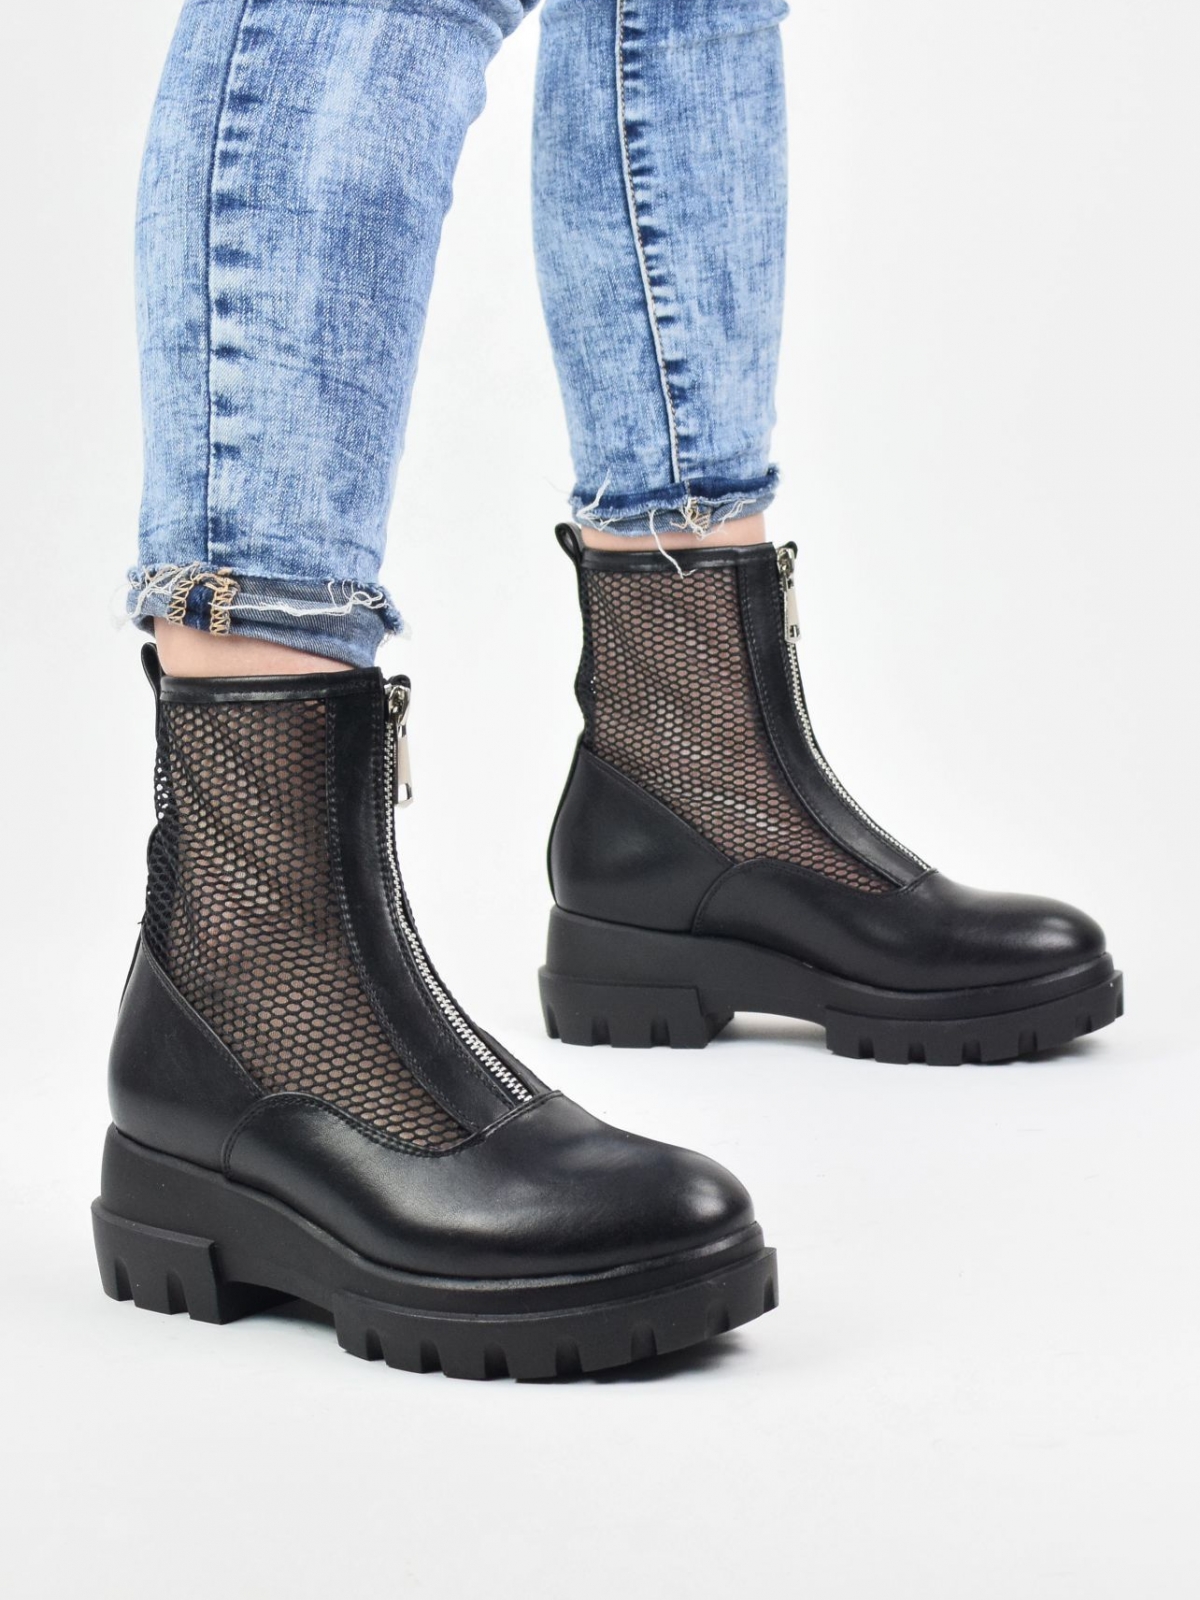 Women's ankle boots in black with mesh